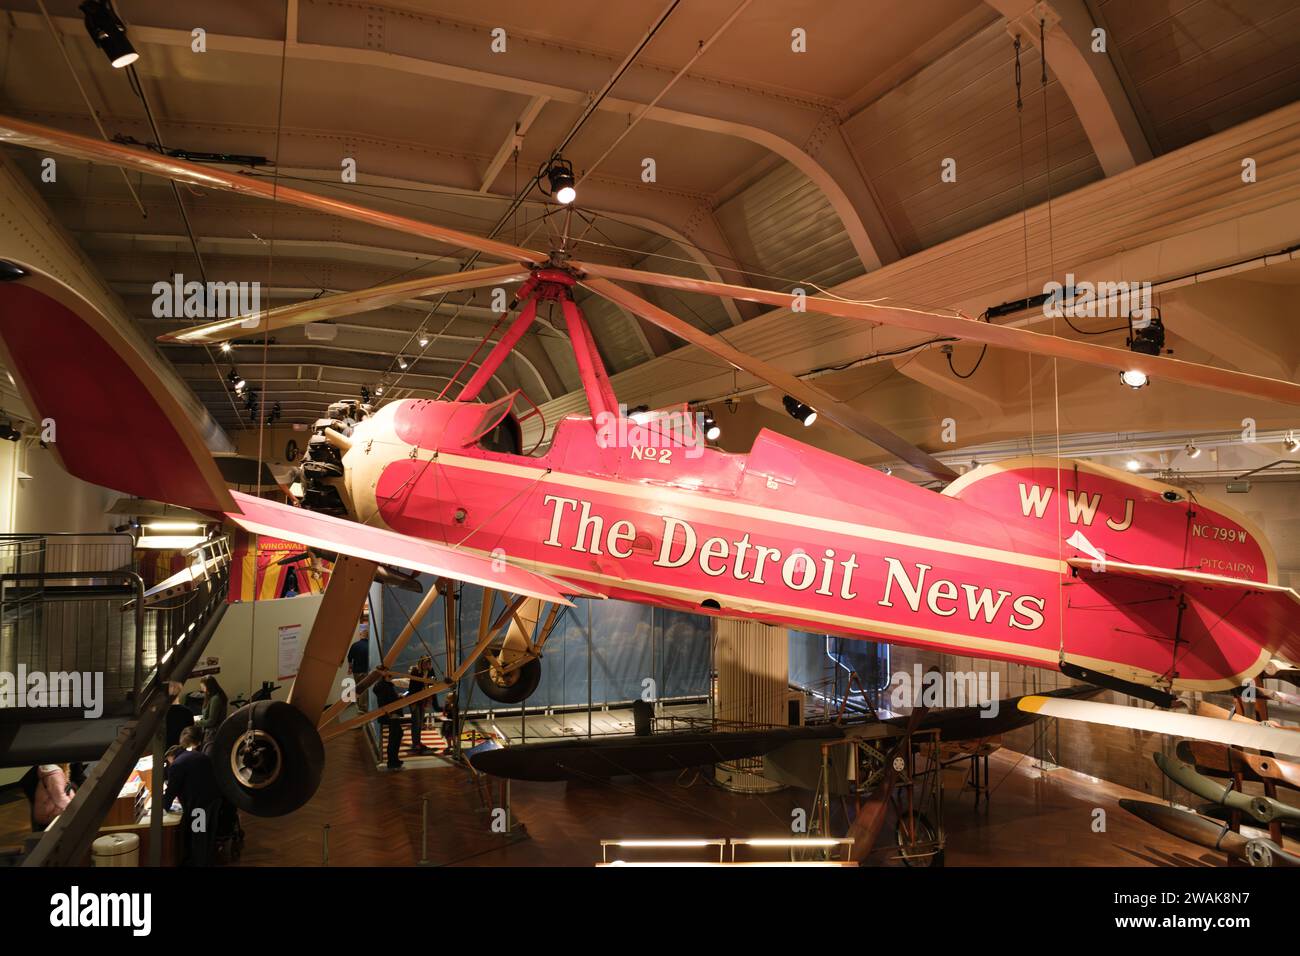 1931 Pitcairn PCA-2 autogiro in mostra presso l'Henry Ford Museum of American Innovation, Dearborn Michigan USA Foto Stock